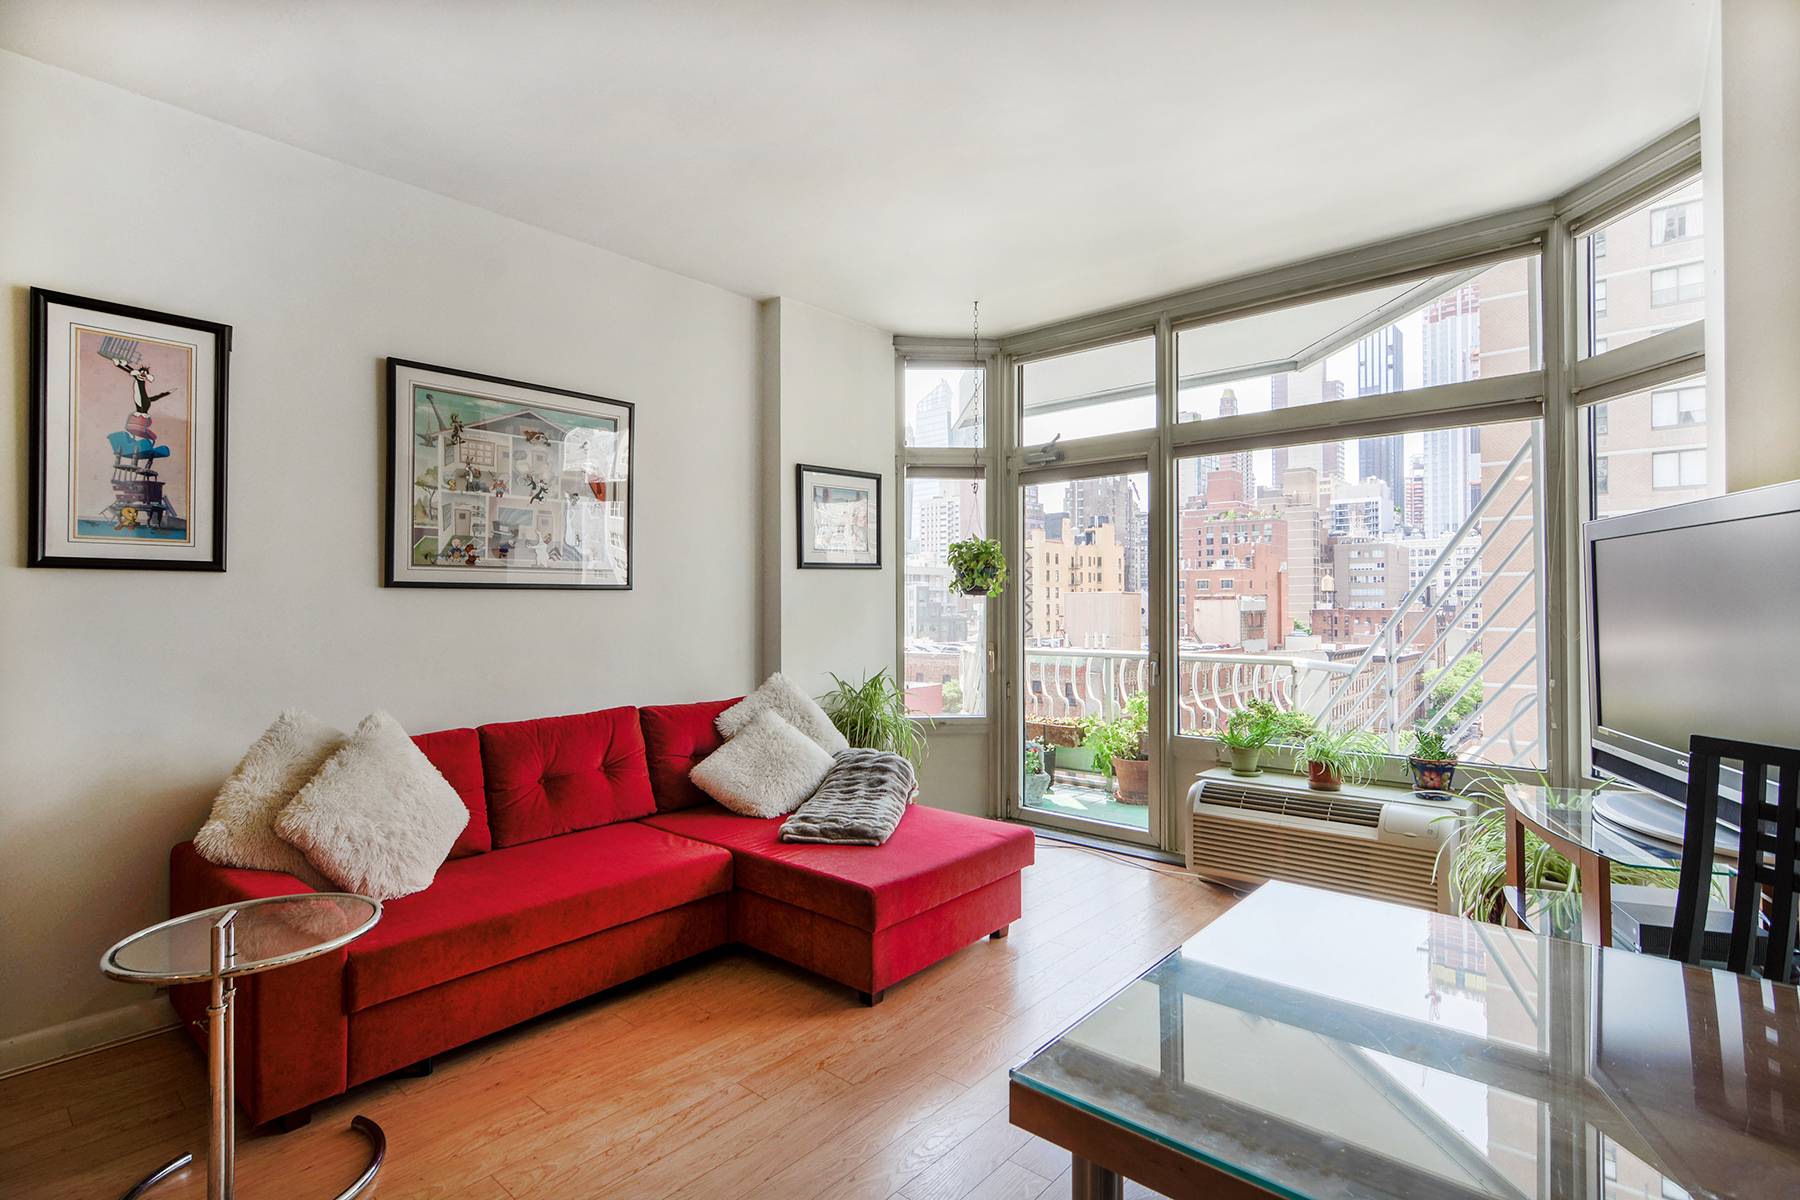 Welcome to The Future Condominium, Apartment 10C, a bright and smartly laid out 2 bed, 2 bath in the heart of Kips Bay.